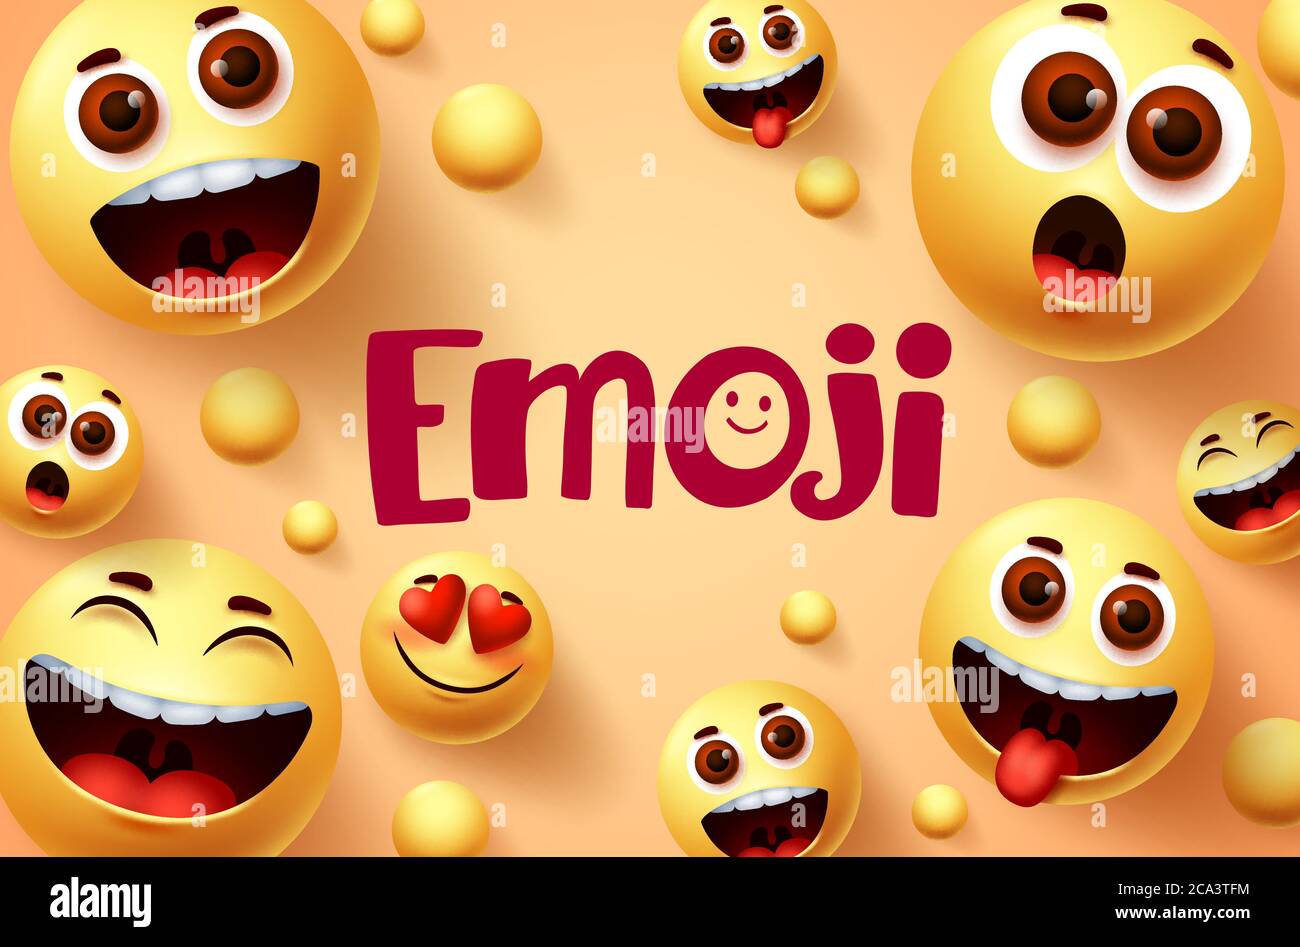 Emoji smileys vector banner design. Smiley emoji collection of funny and happy facial expressions in yellow background. Vector illustration. Stock Vector